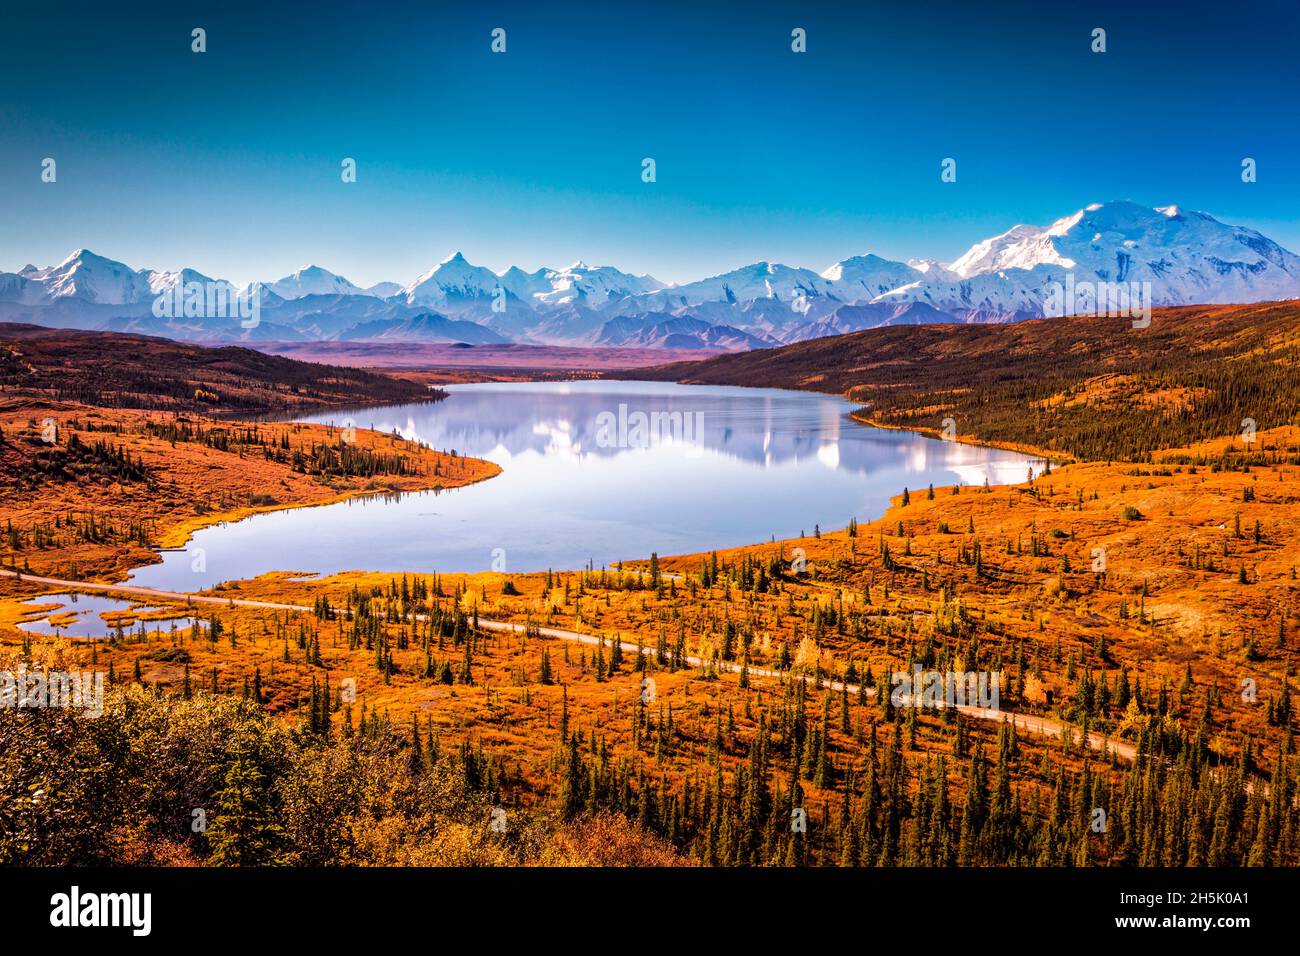 Mount Denali (McKinley) and Wonder Lake at sunrise with autumn coloured tundra and a blue sky, Denali National Park and Preserve, Interior Alaska Stock Photo